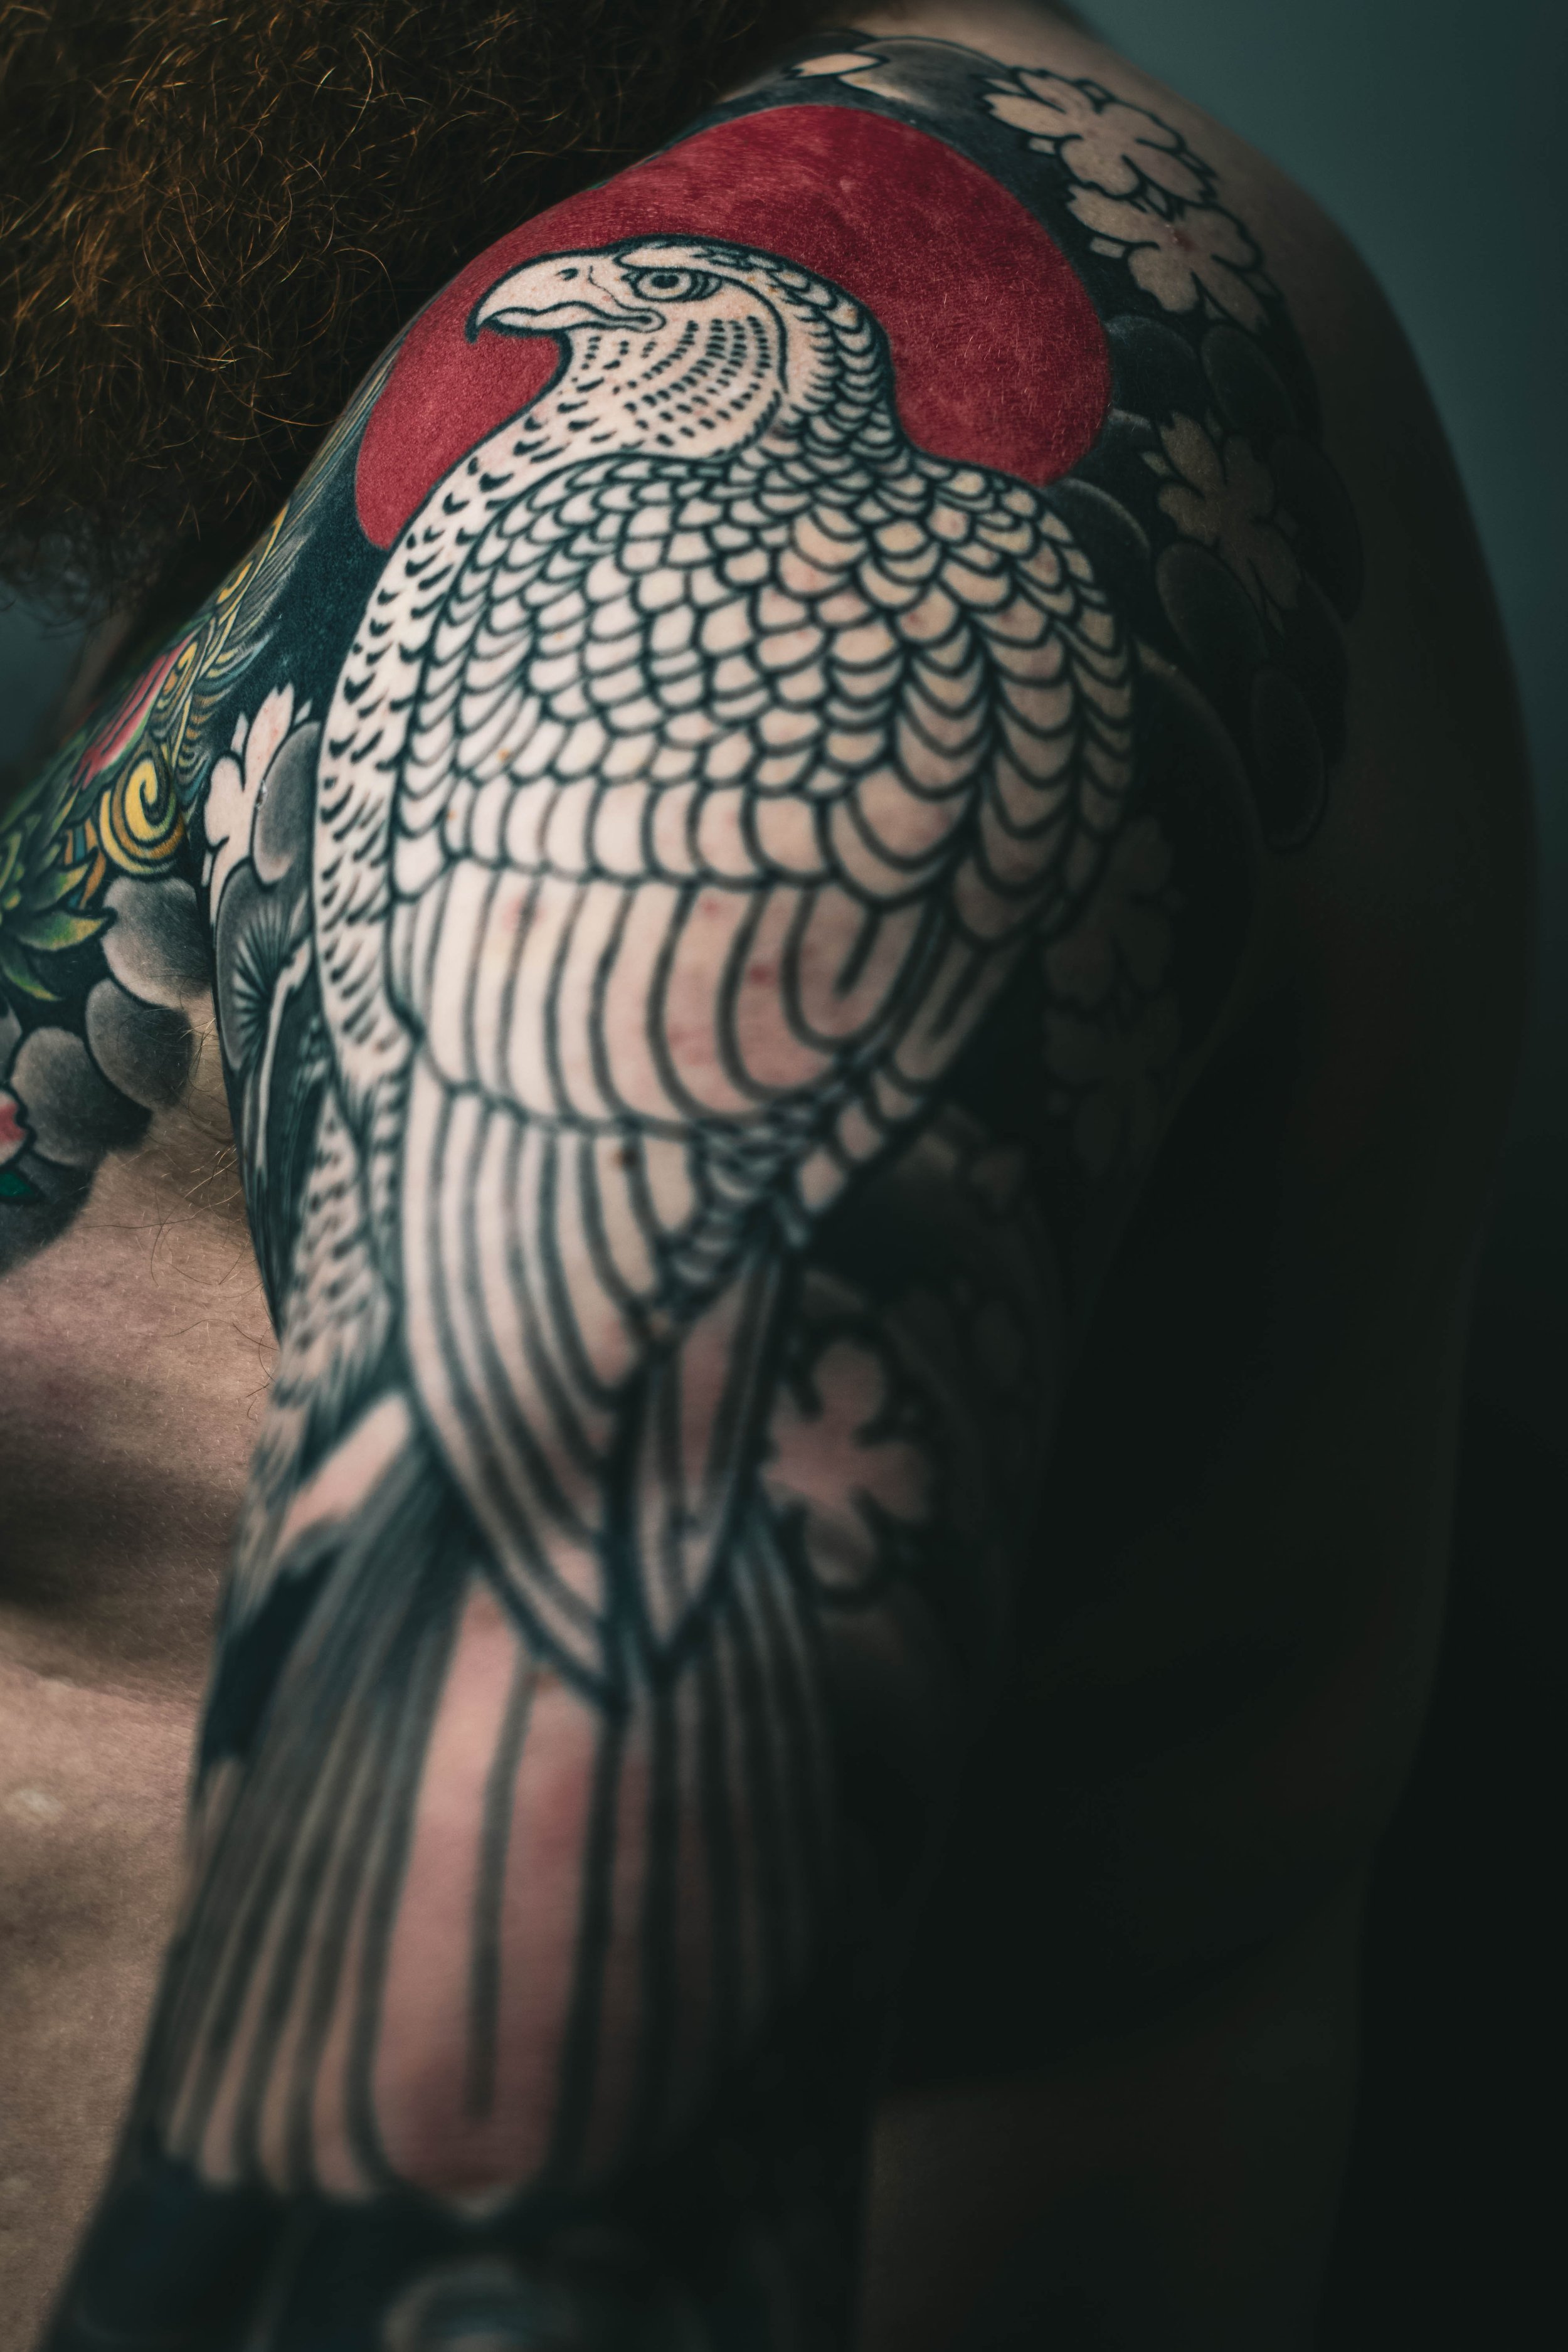 75 Brilliant Eagle Tattoo Designs in the Trendiest Styles. | Inku Paw